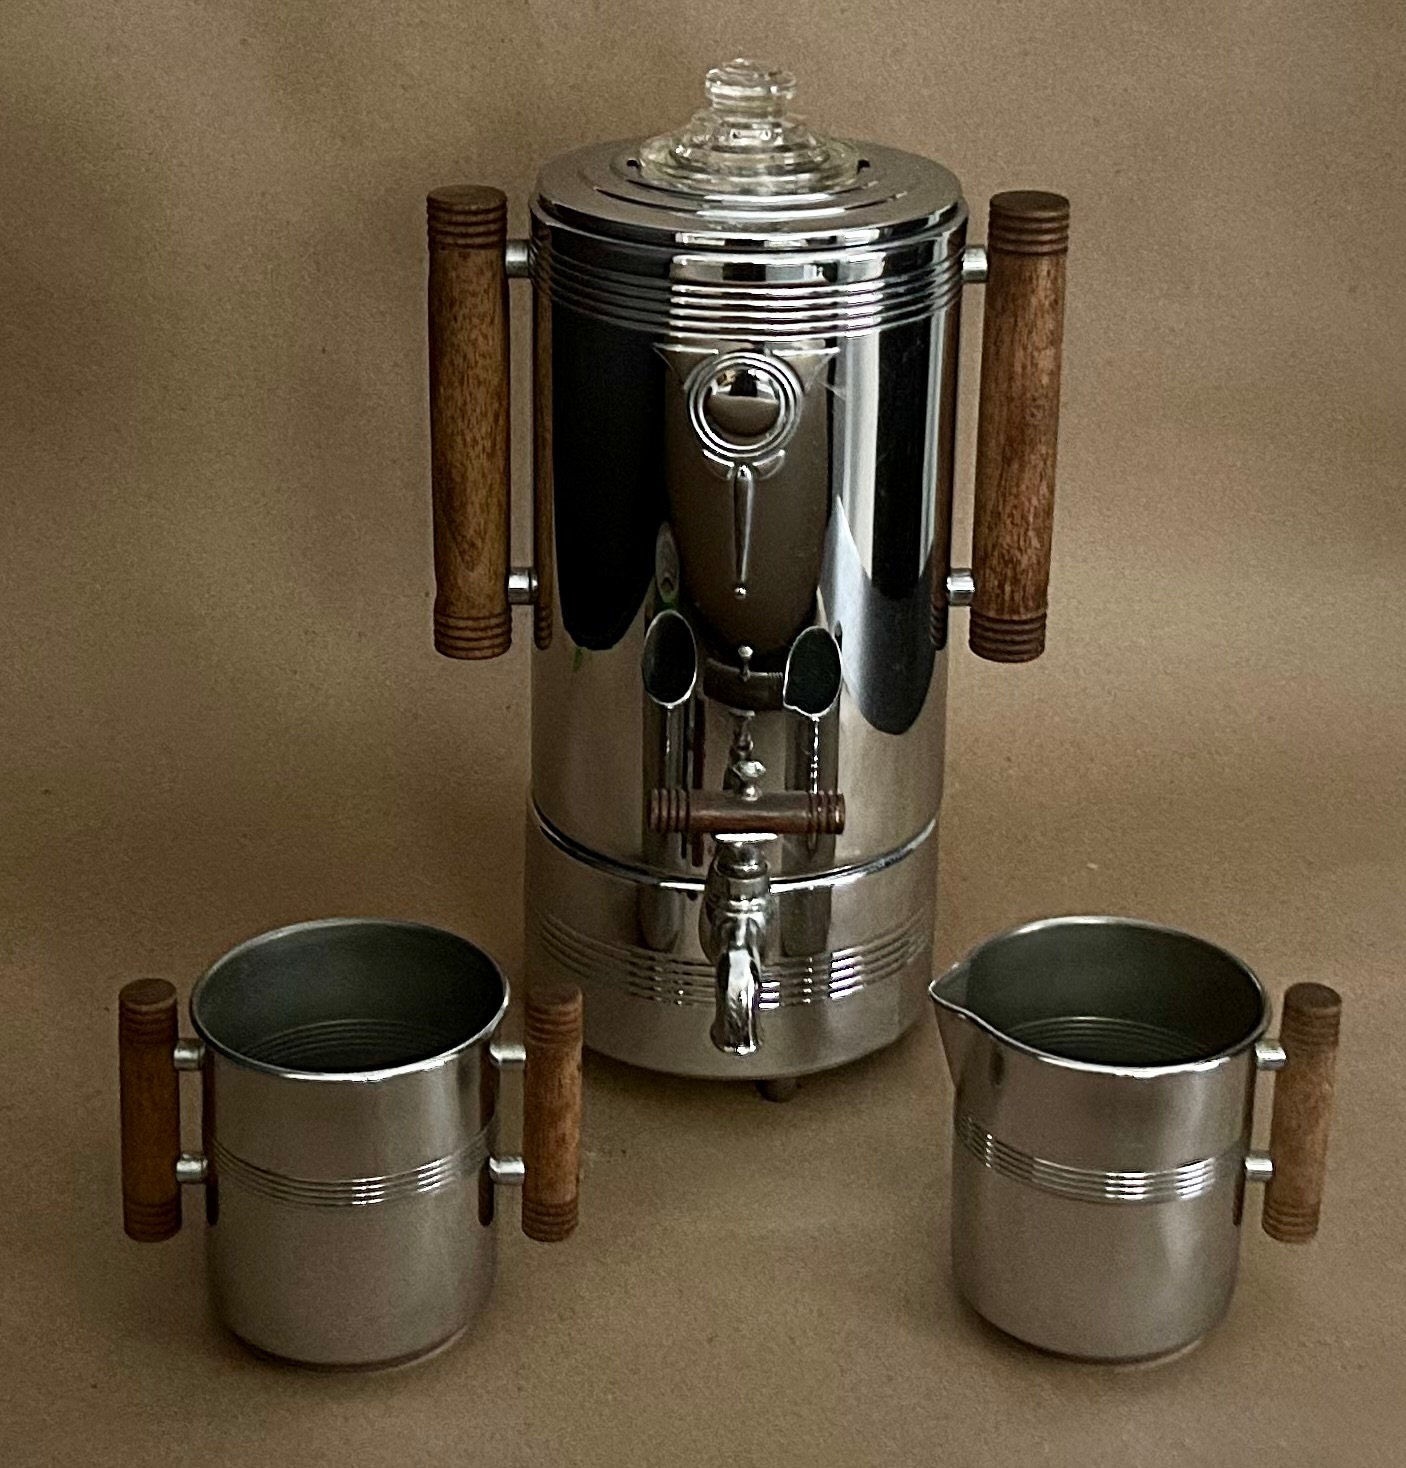 Westinghouse Electric Percolator Coffee Pot 12 Cup Model PE552 WORKS!